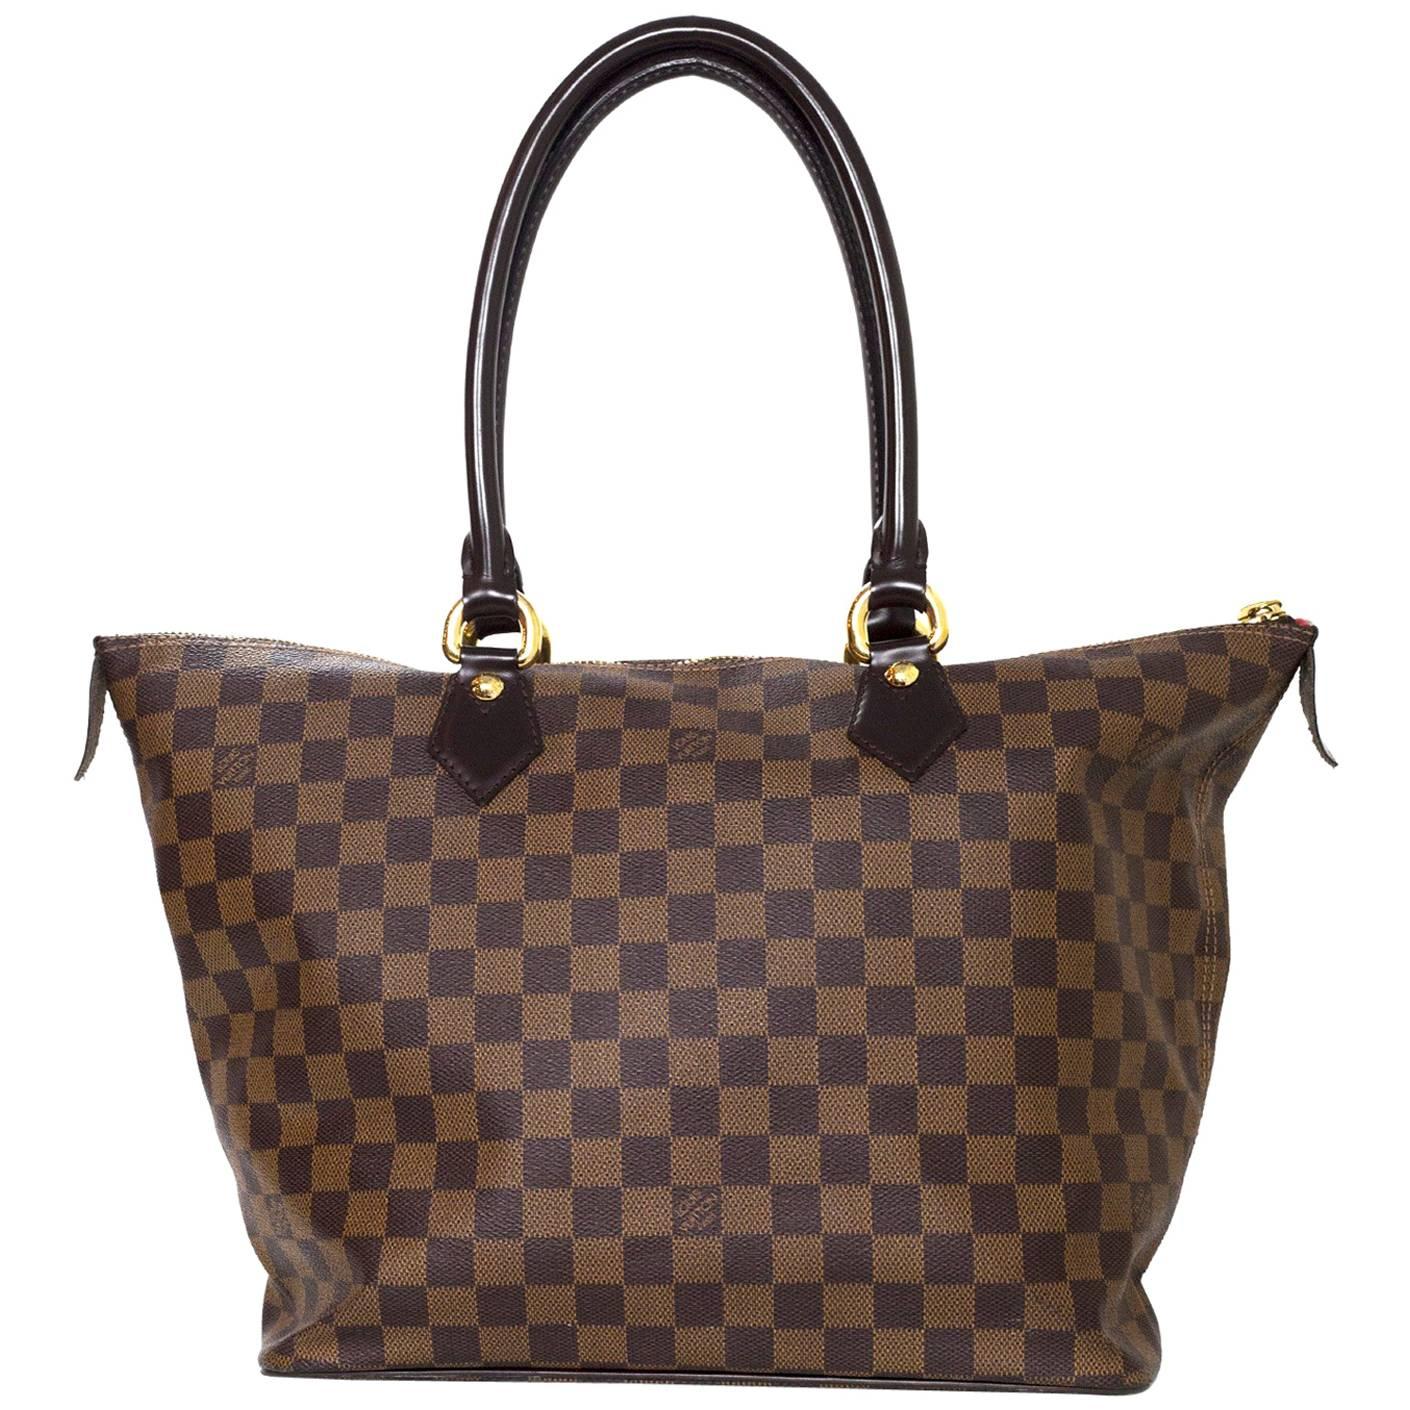 Shop Lv Tote Bag Zipper Medium with great discounts and prices